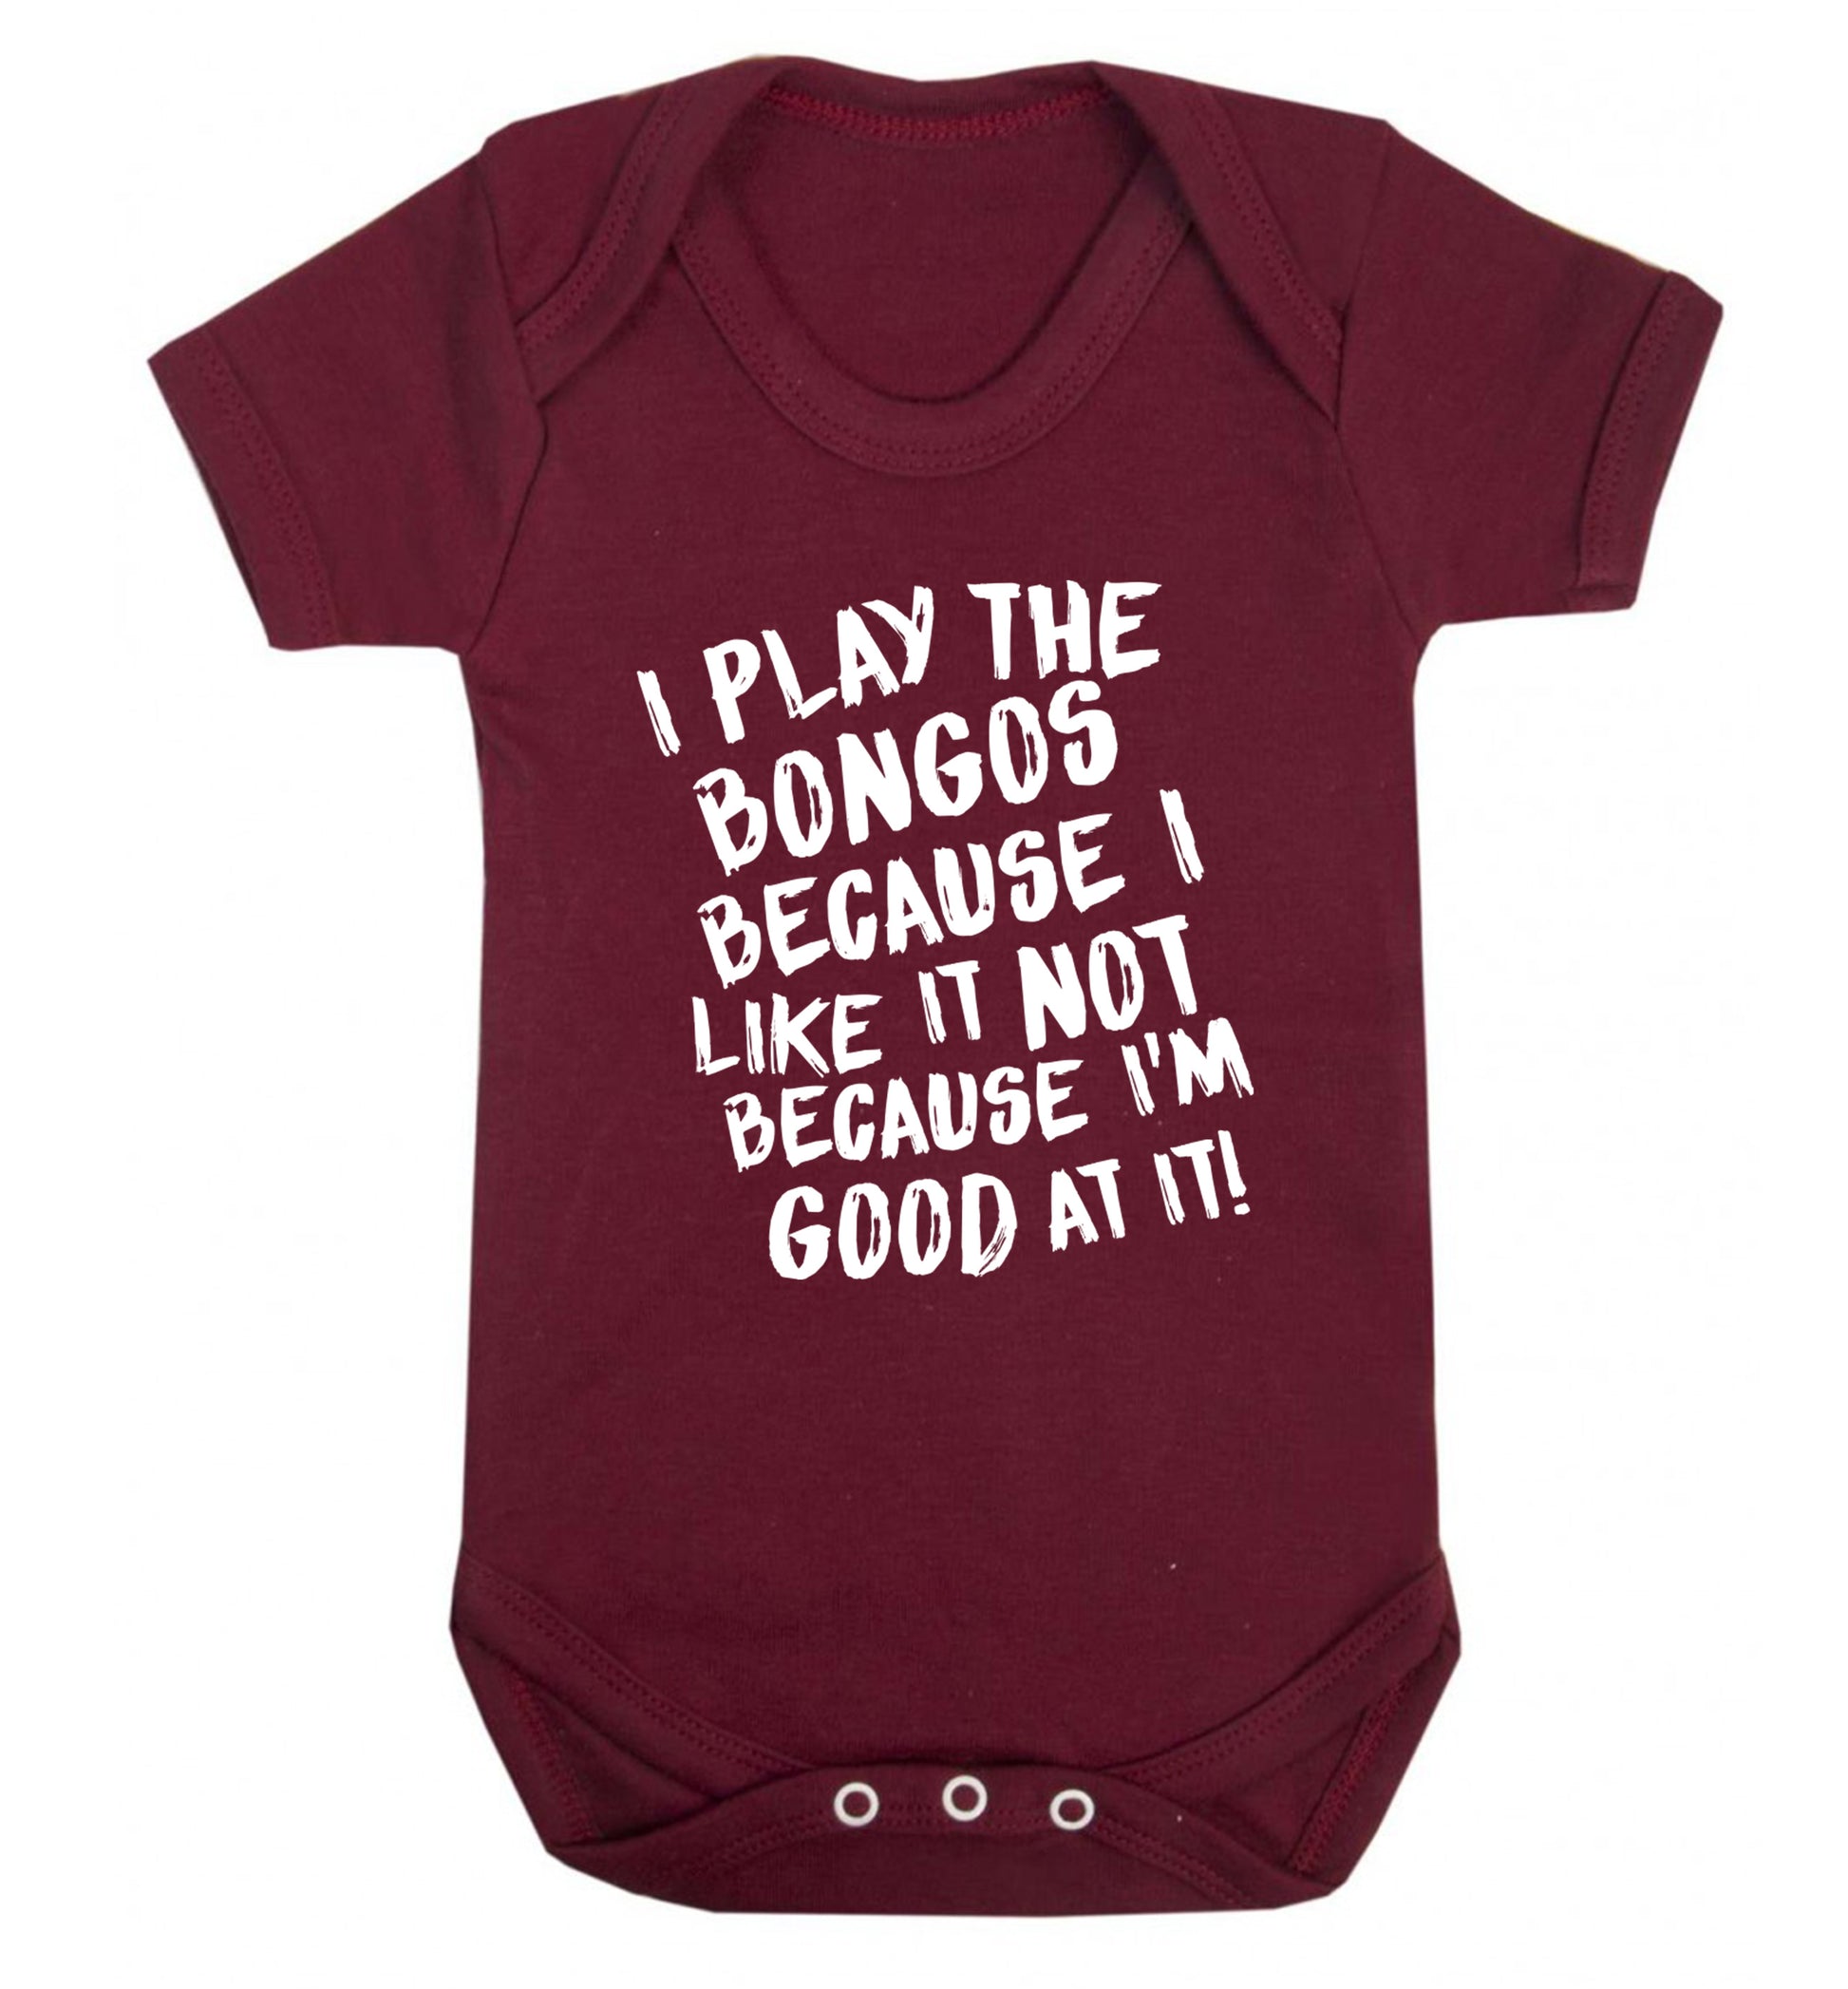 I play the bongos because I like it not because I'm good at it Baby Vest maroon 18-24 months